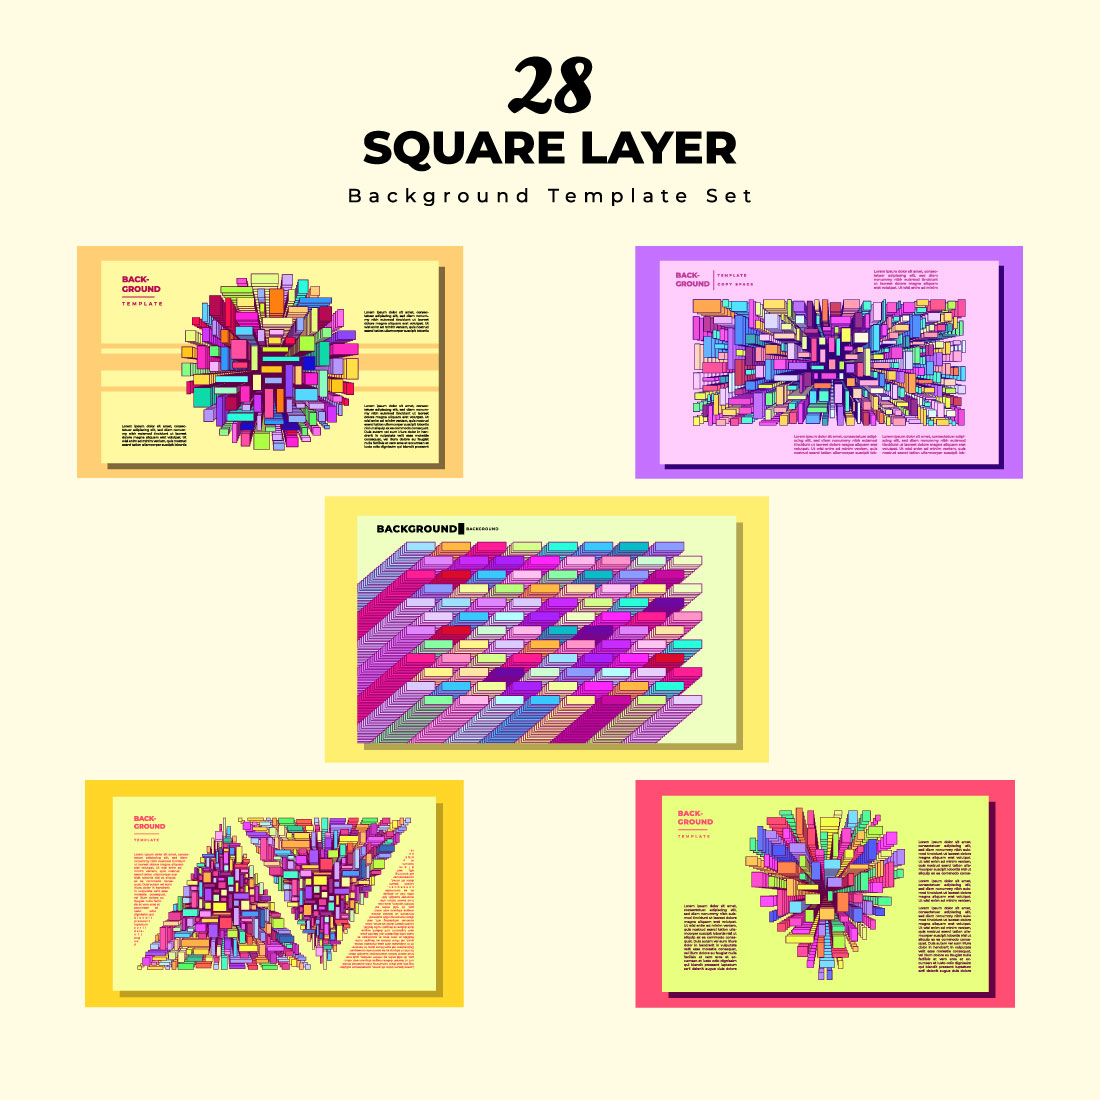 28 Isometric square layer background template set cover image.